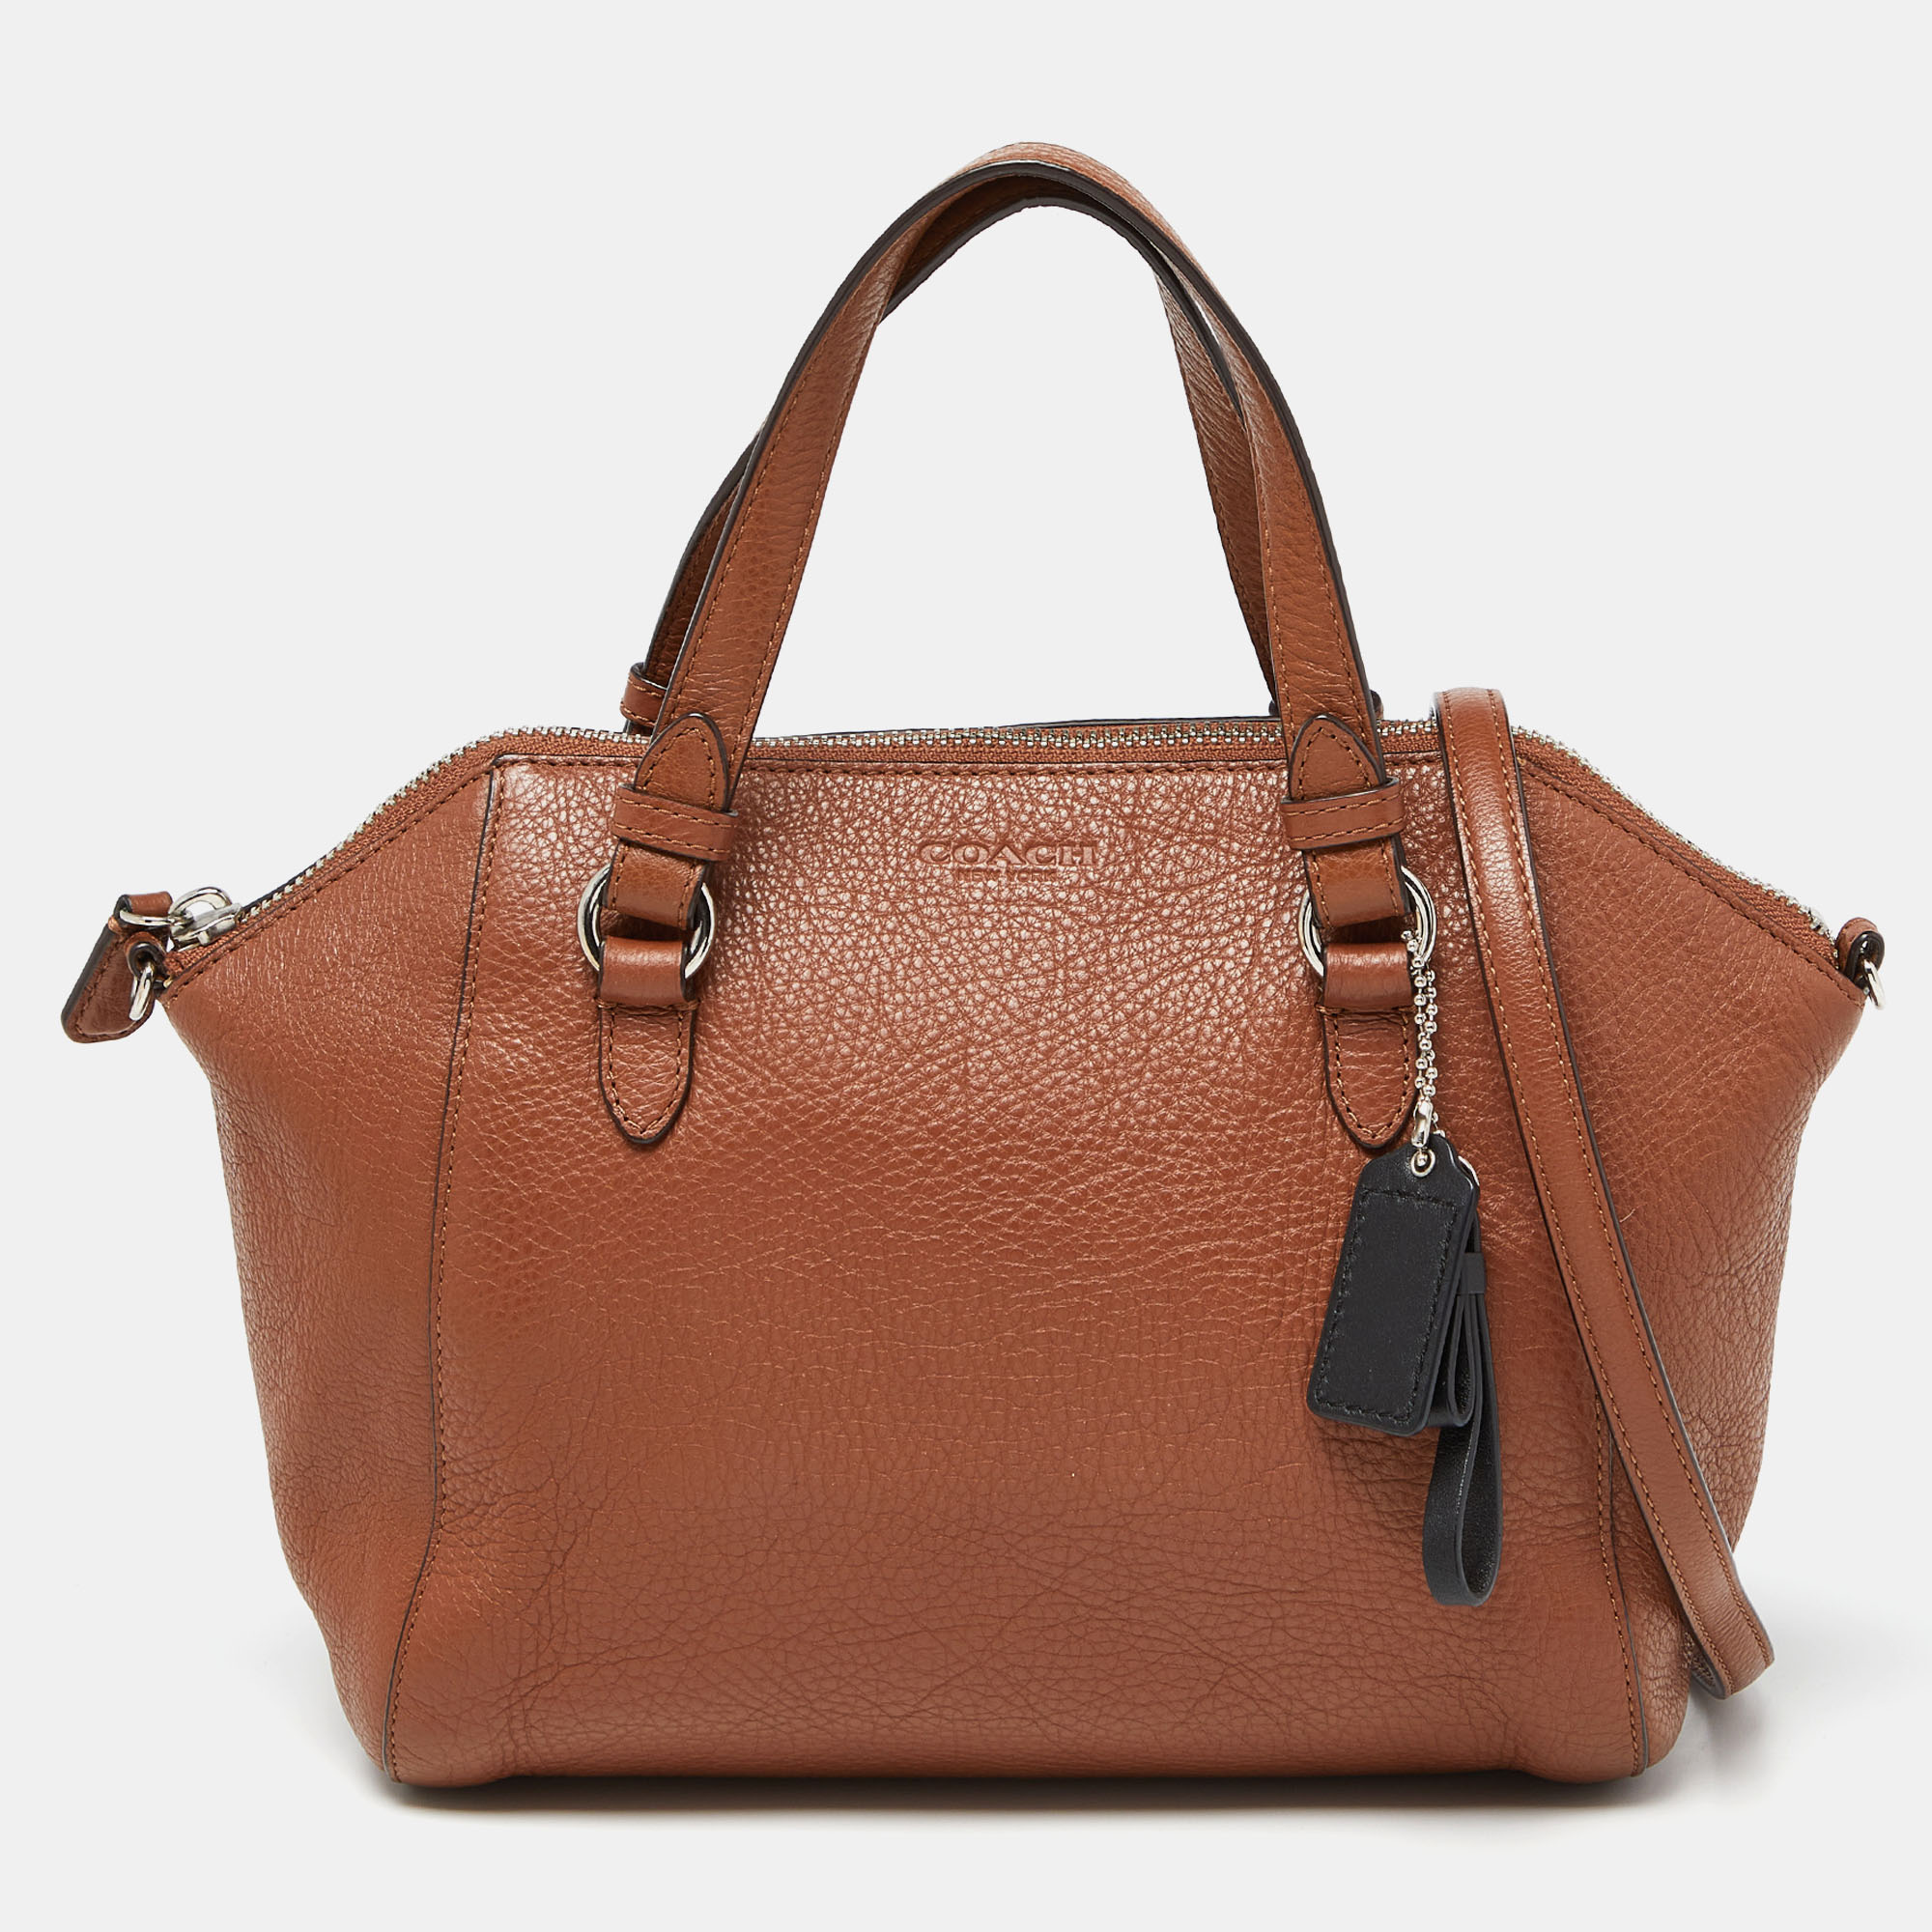 This satchel is rendered in the finest quality materials into an elegant design. Versatile and functional it is well sized for your daily use.